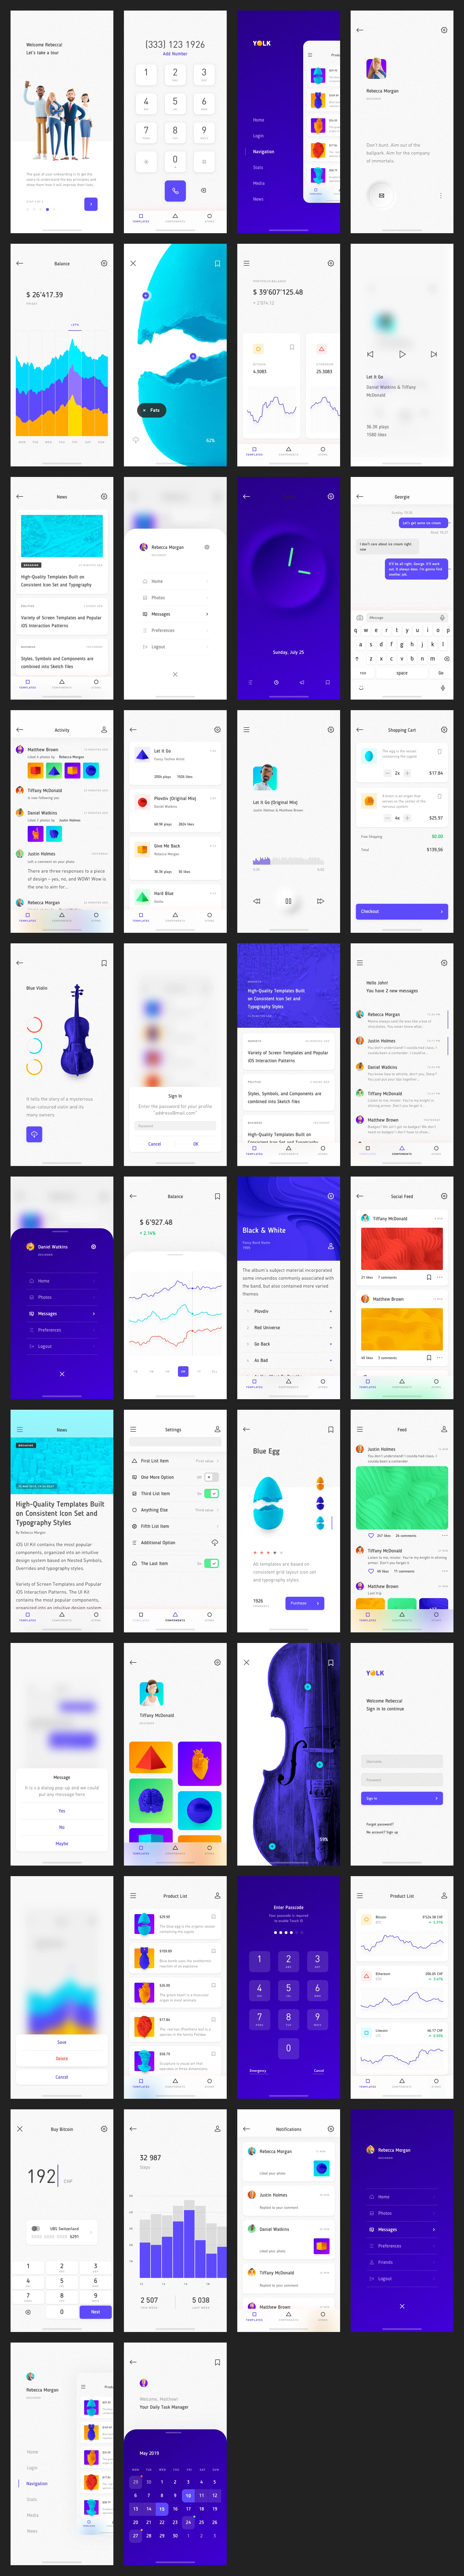 Yolk Free iOS UI Kit Design System for Sketch - Yolk is free mobile UI Kit designed exclusively for Sketch by Antoni Sinote Botev. It features 42+ mobile screen pages to get you started on your projects.